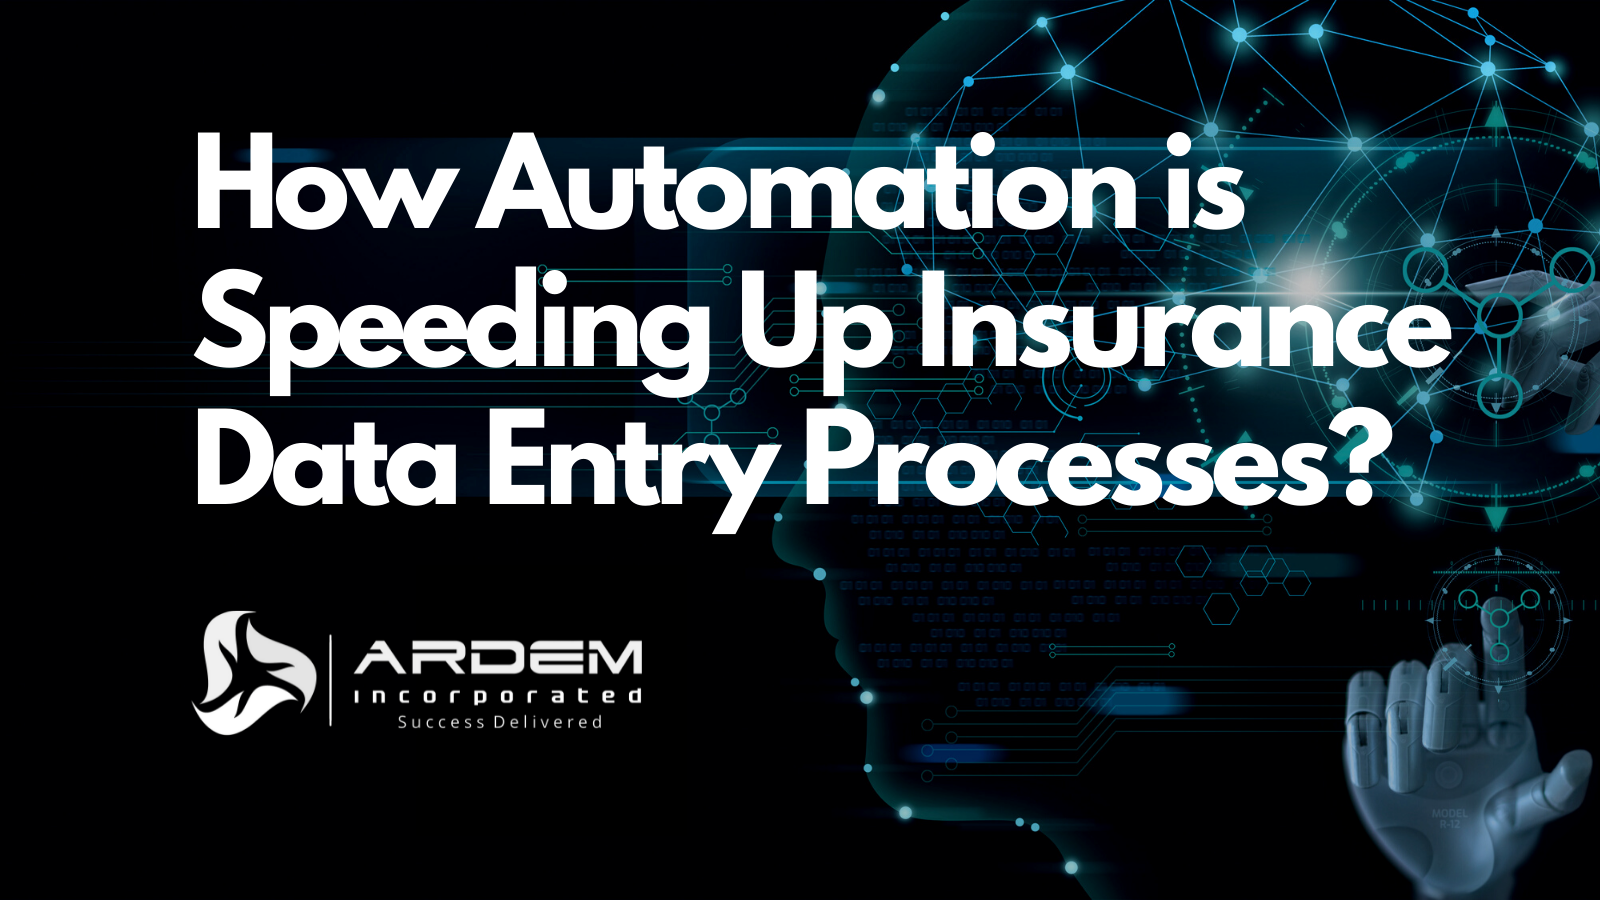 Insurance Data Entry Automation Outsourcing Blog